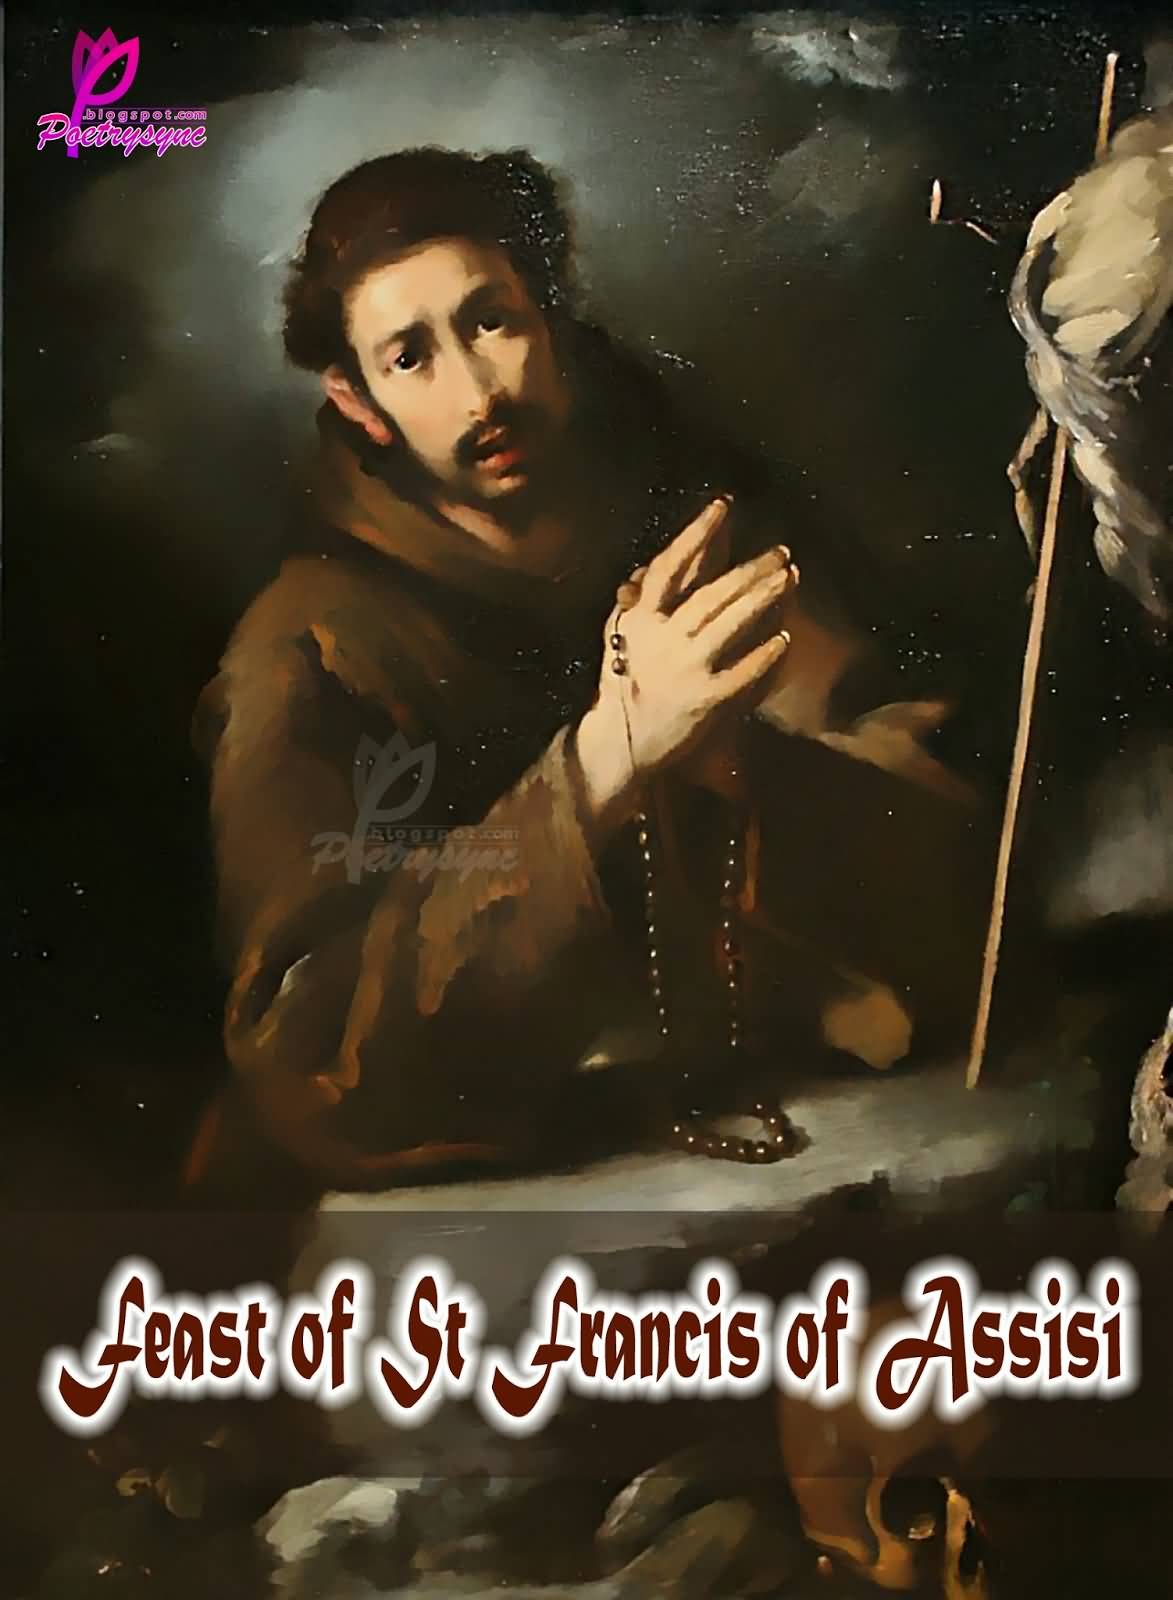 Feast Of Saint Francis of Assisi